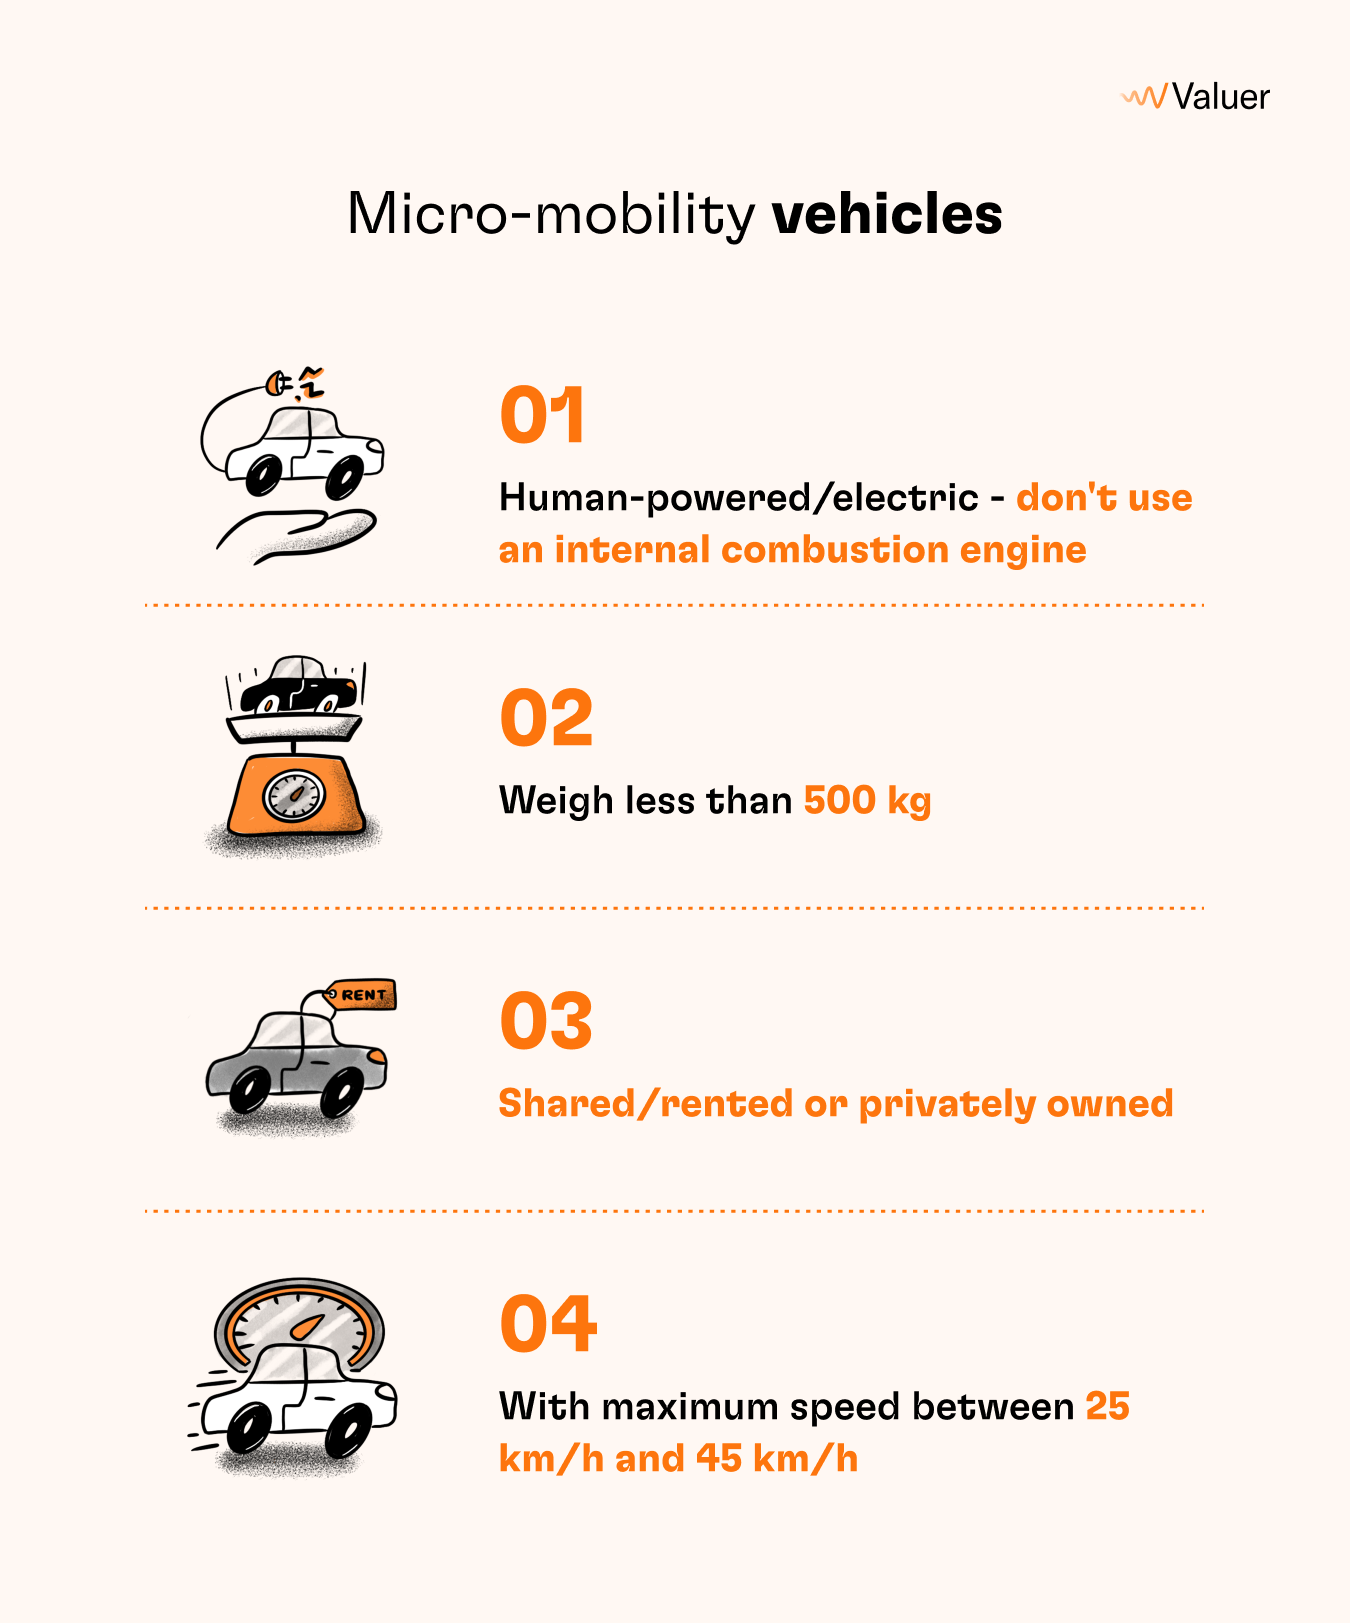 Micro-mobility vehicles